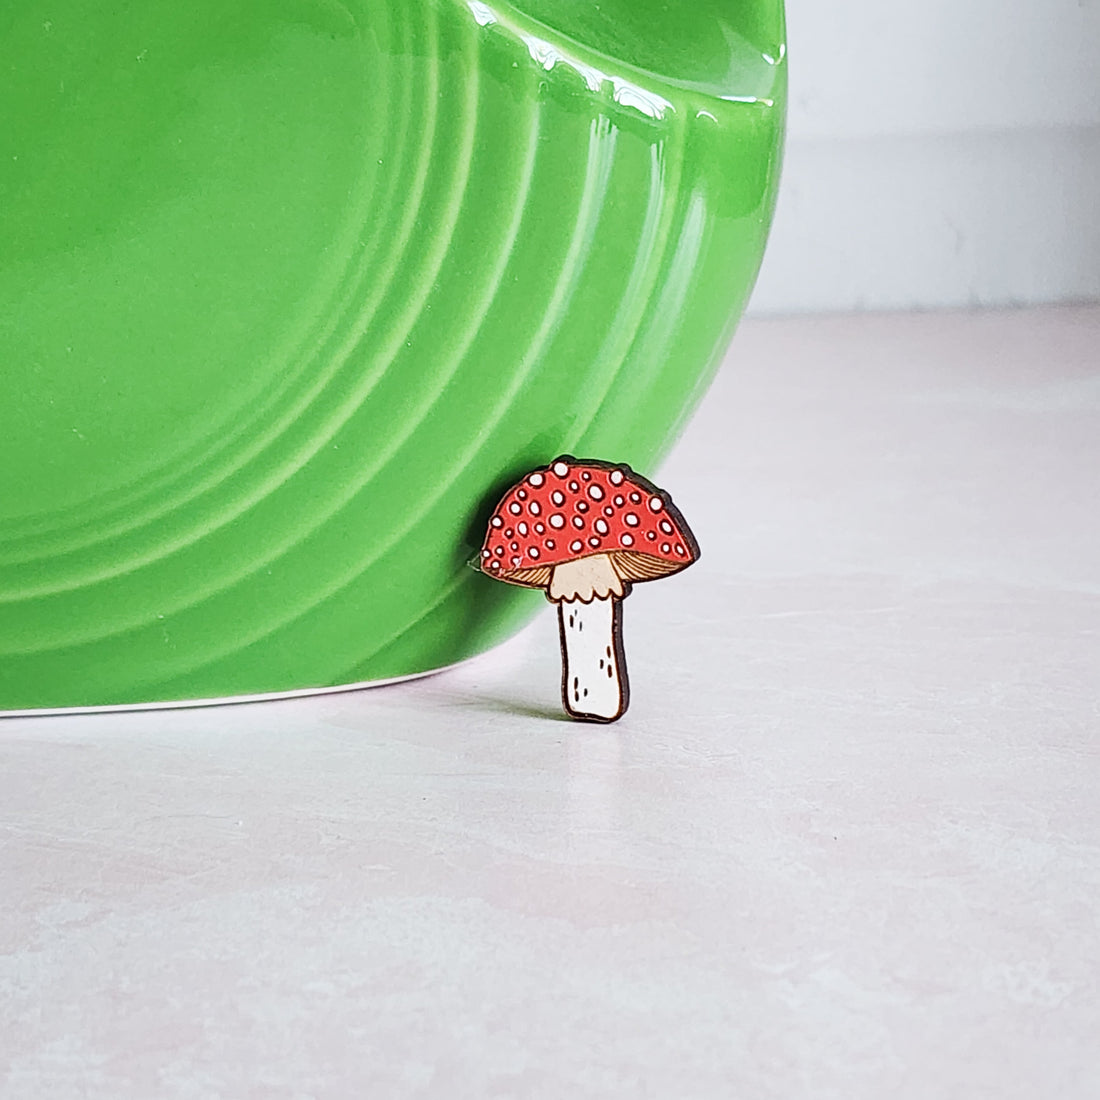 red and white dotted mushroom pin sitting inf ront of a green vase